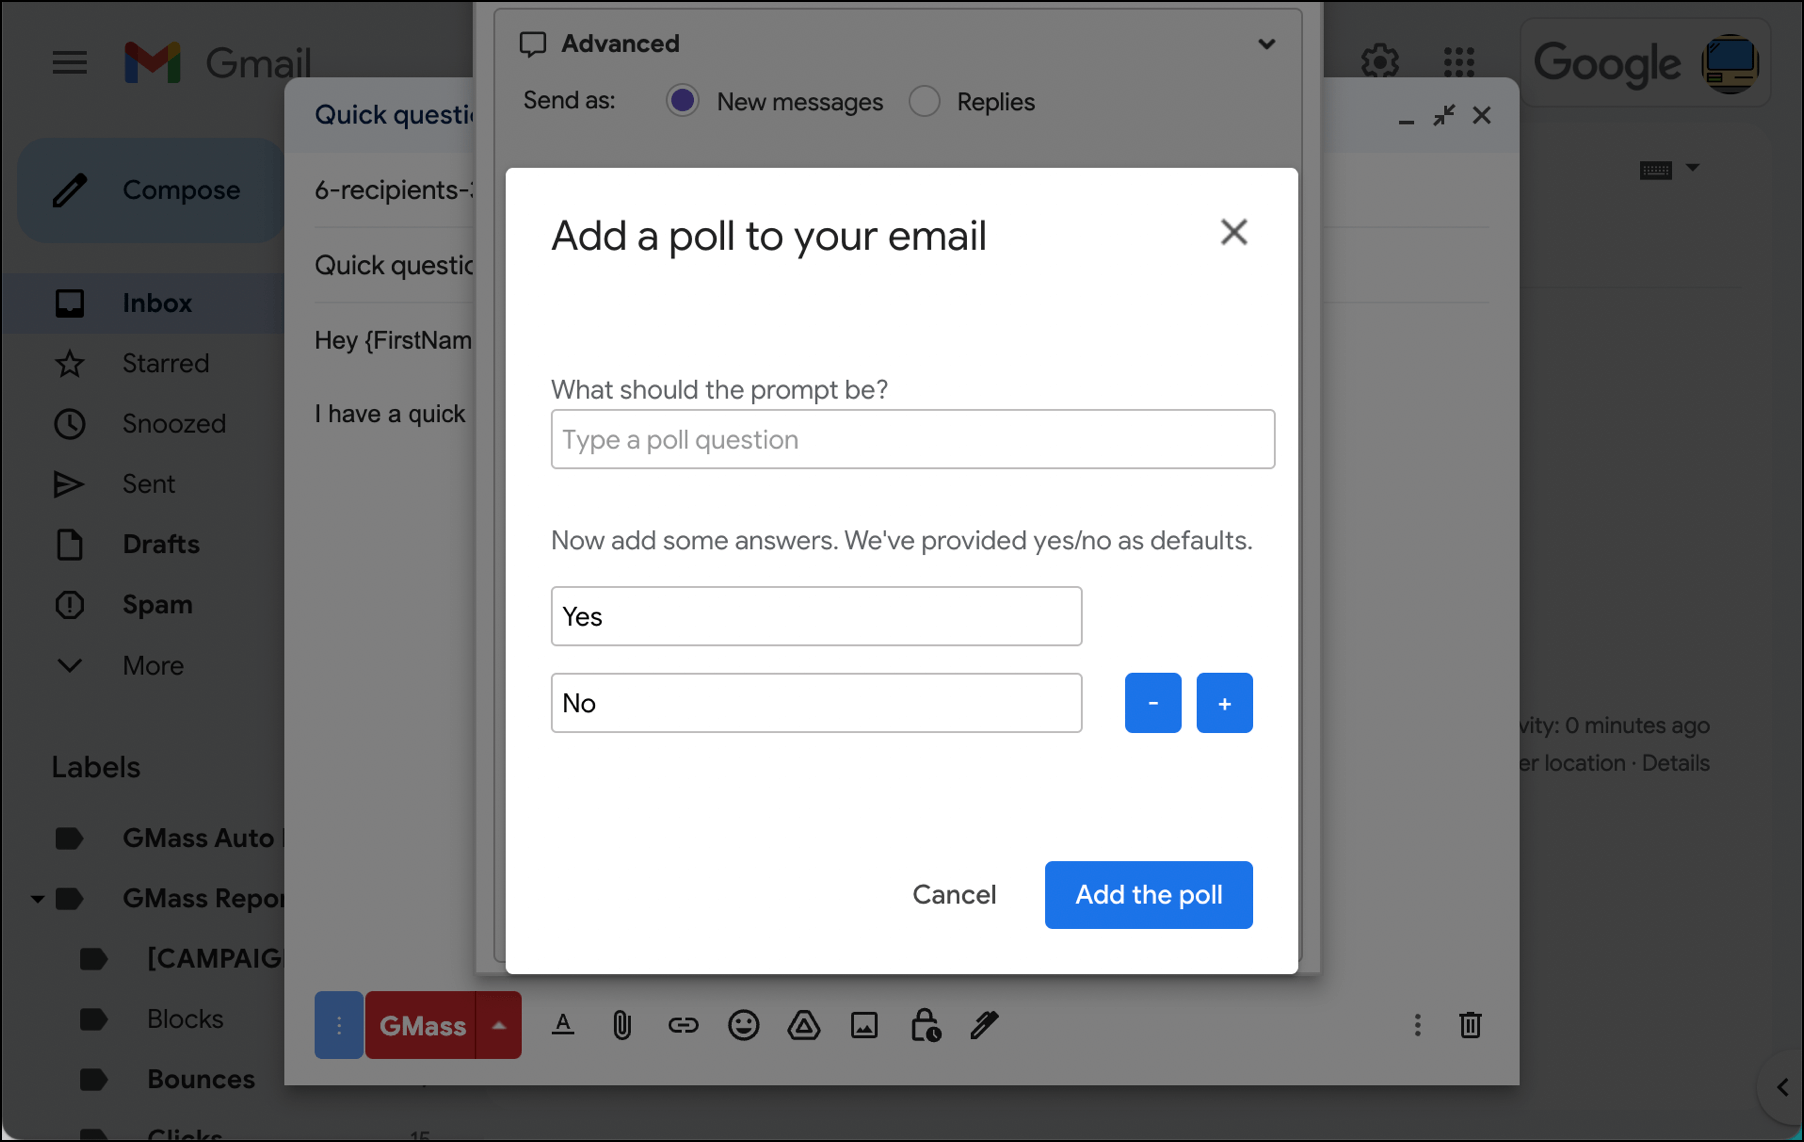 Add a poll to your email